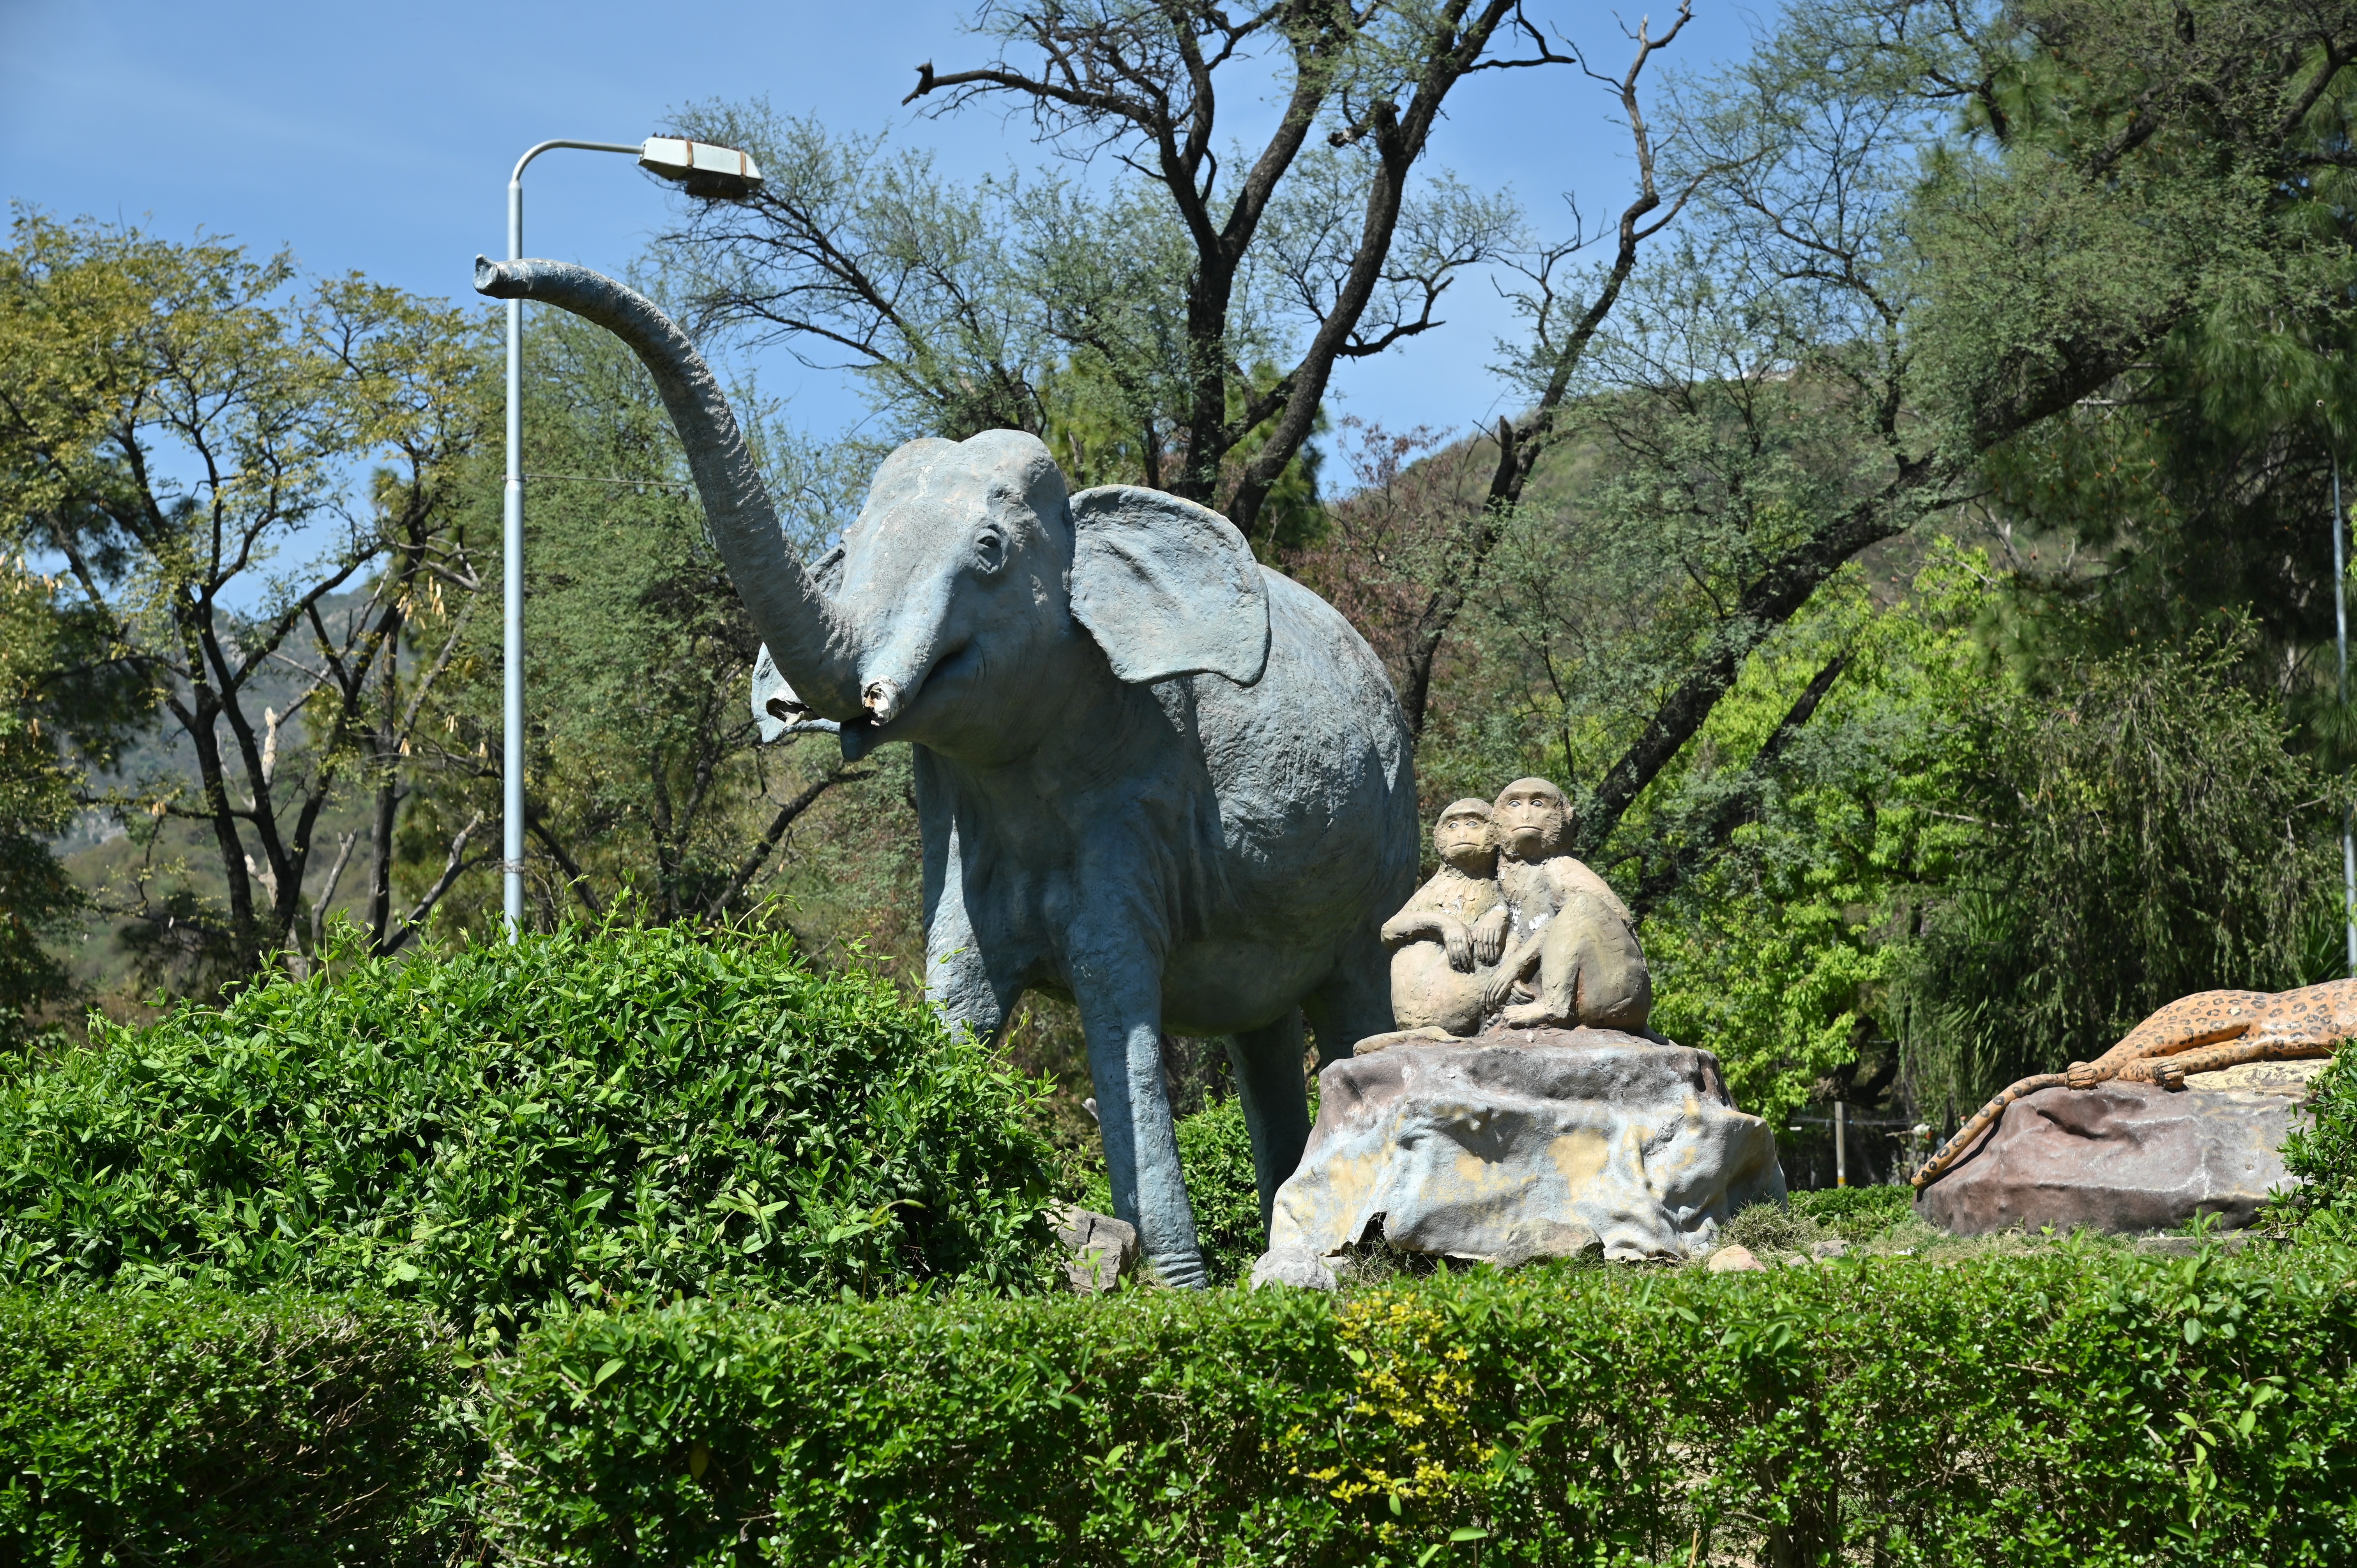 The 3D statues of an elephant and monkeys